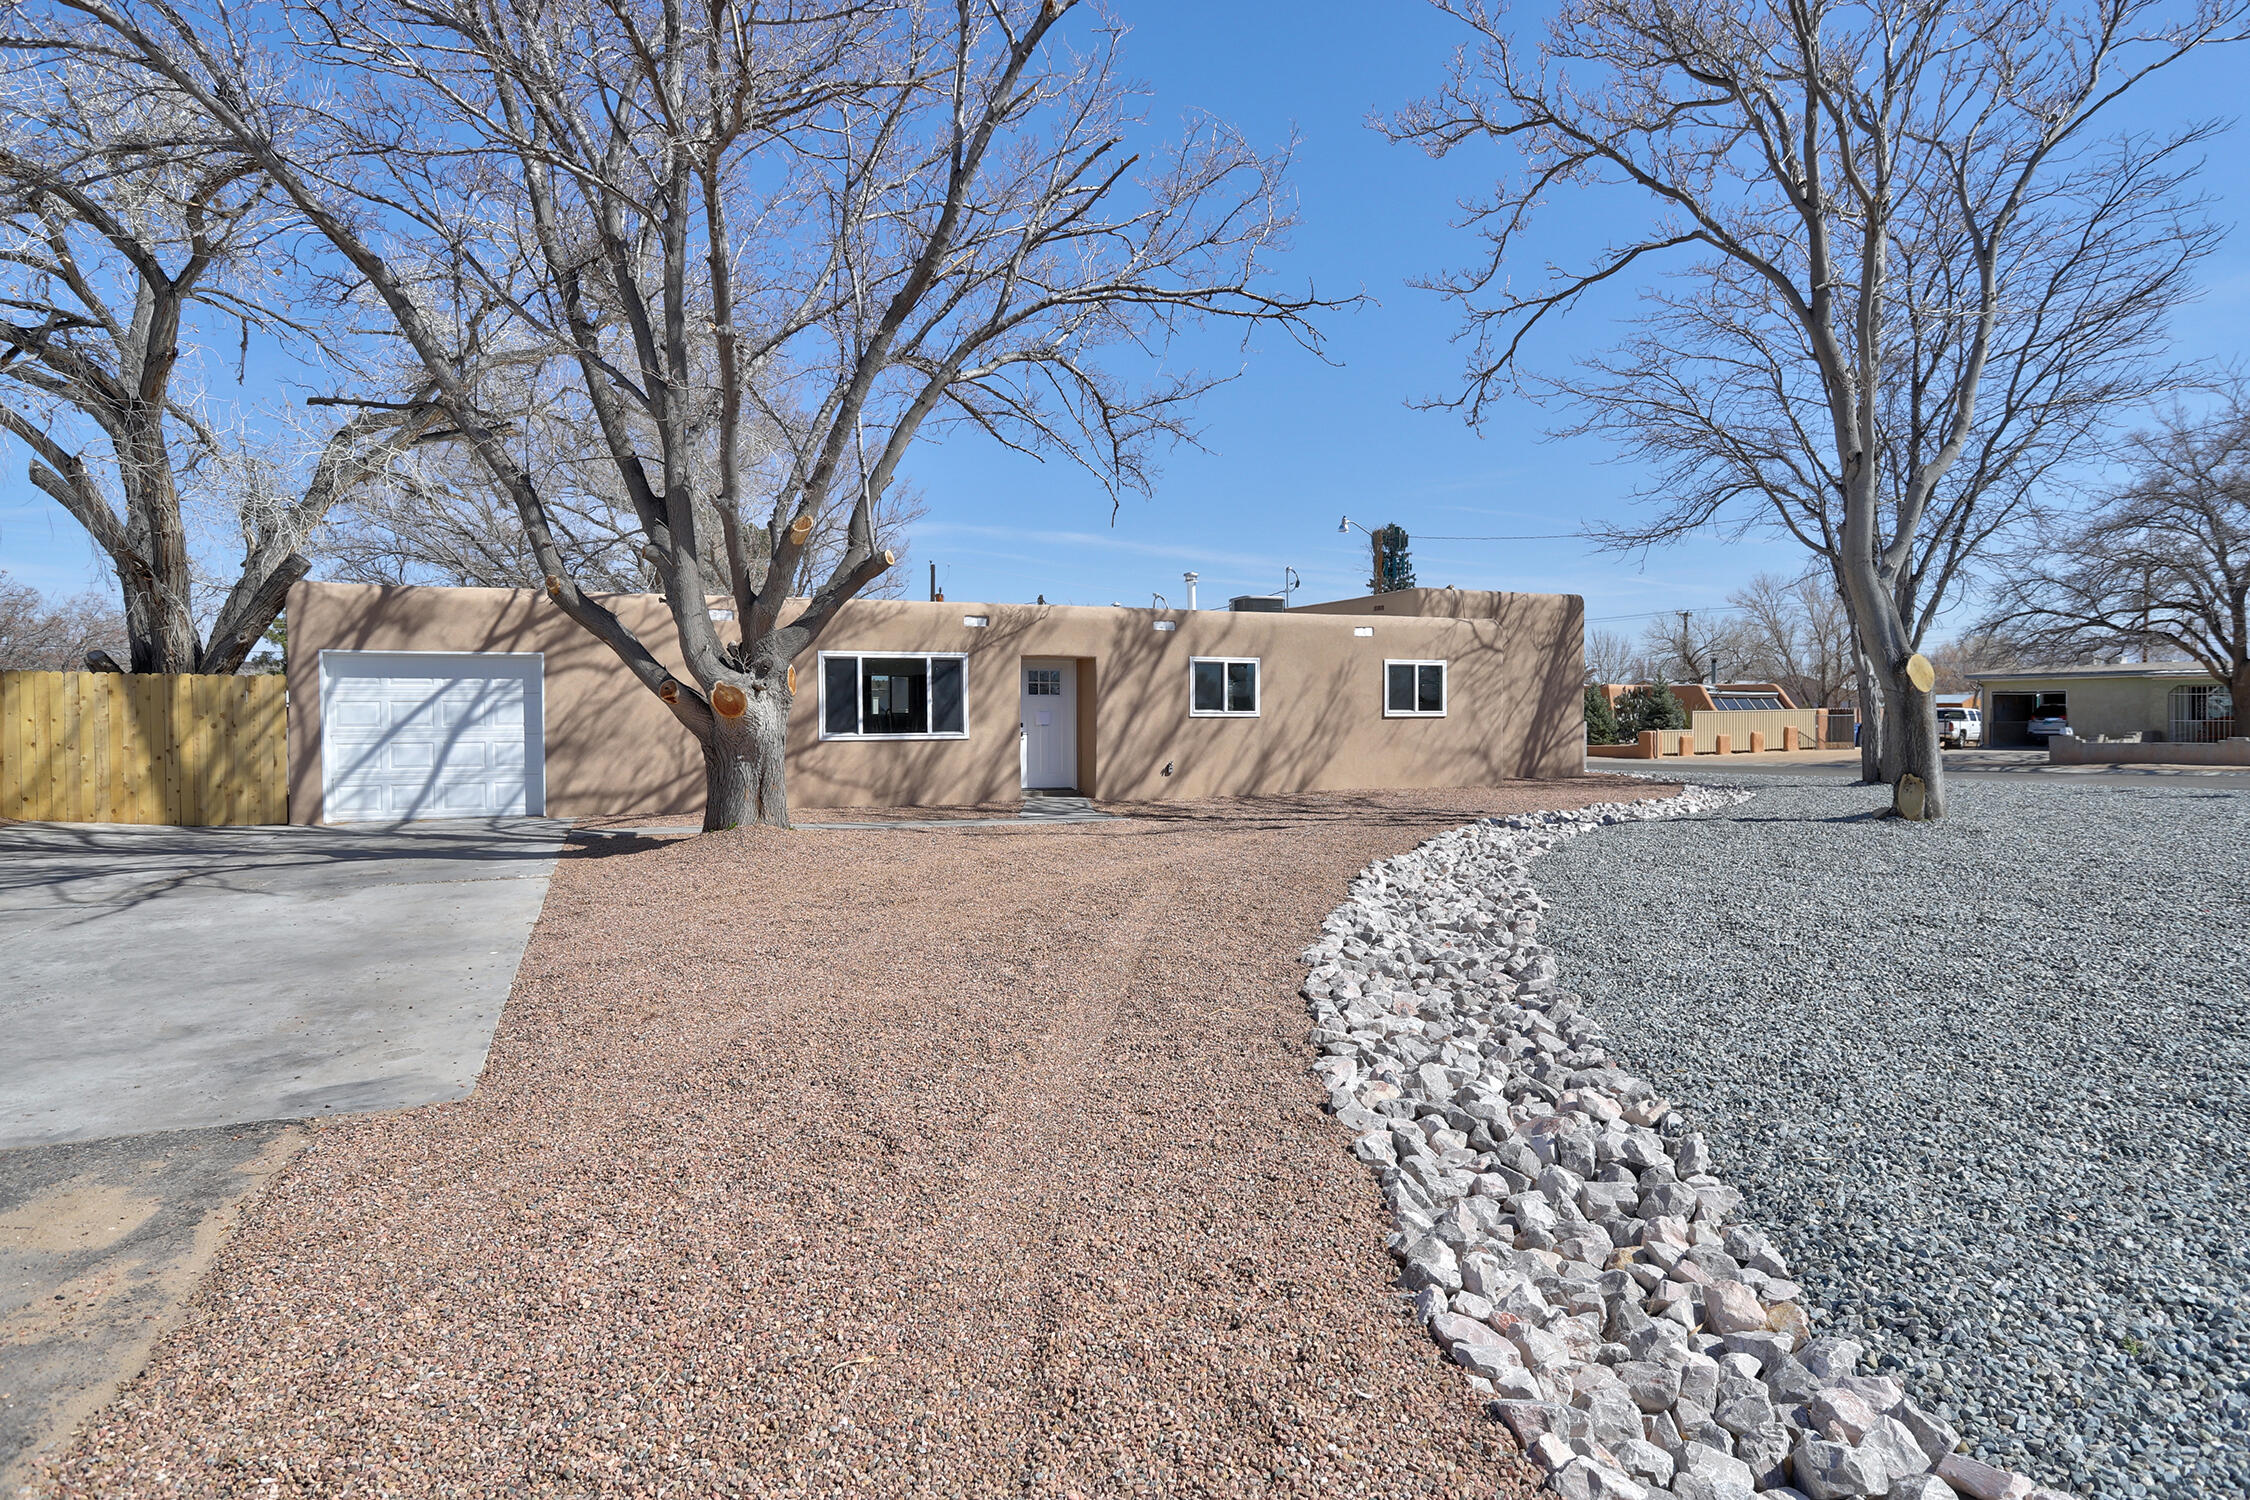 Great Remodel!  Move in Ready! Large .036 acre lot with backyard access .New TPO Roof, New refrigerated air, New Granite, New kitchen cabinets and vanities, New fixtures, New paint, New windows, New electrical upgrade.